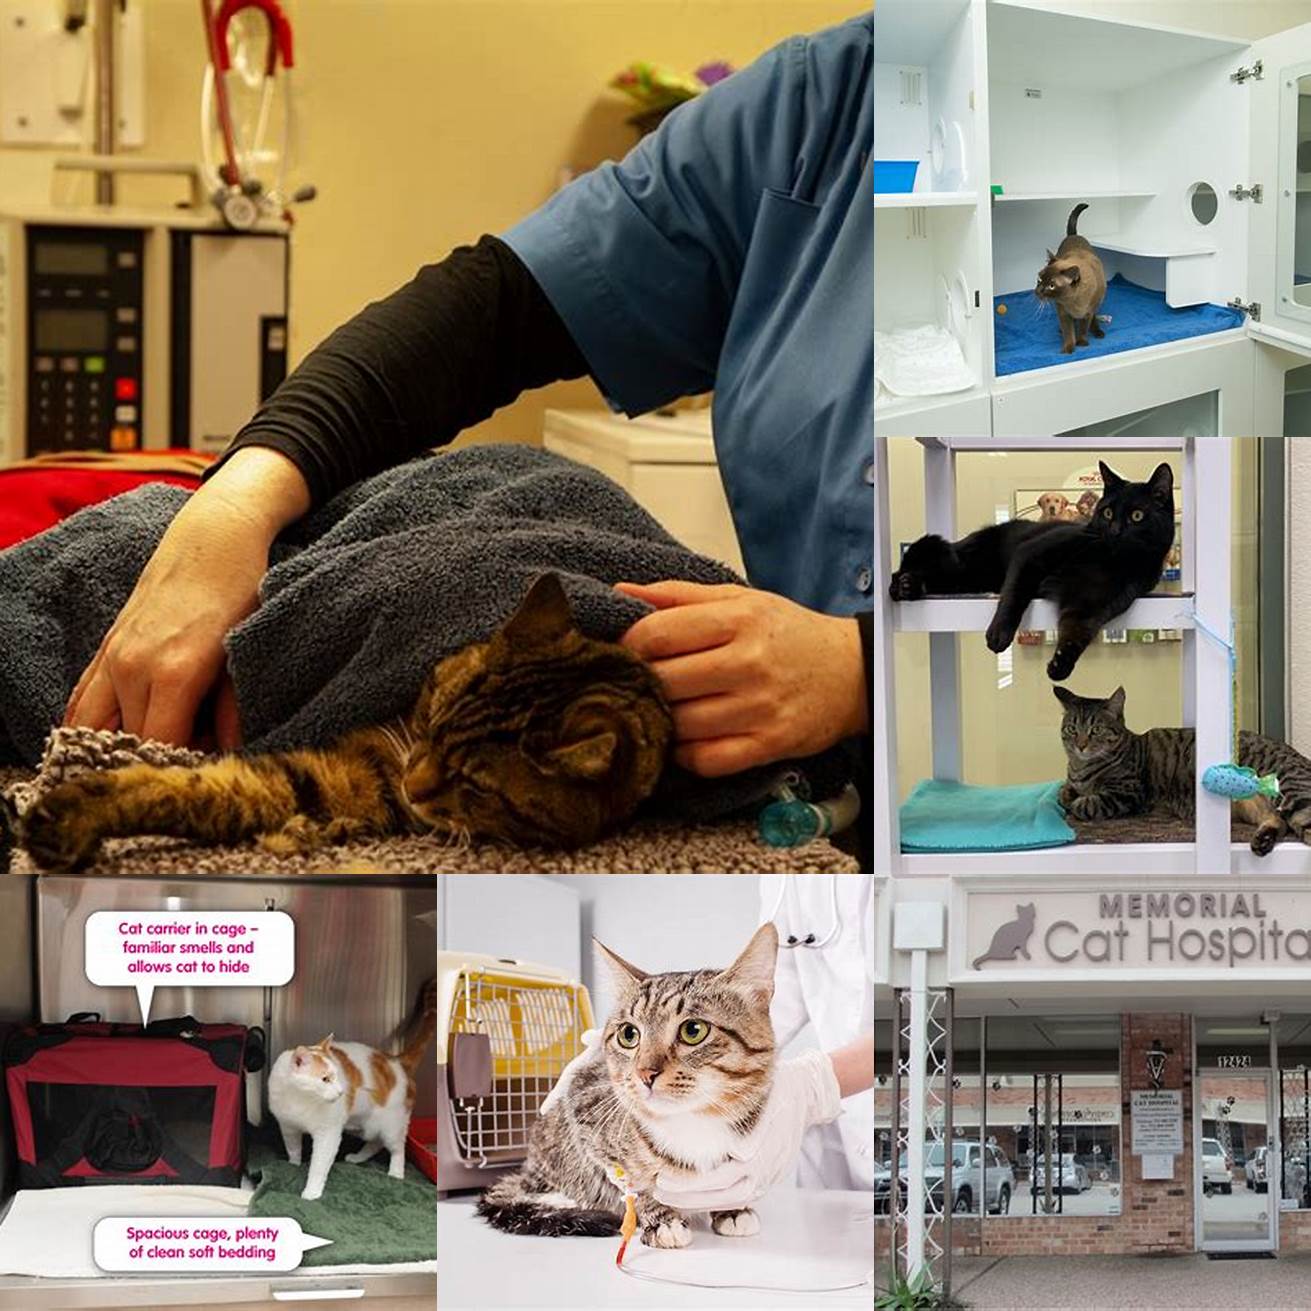 The Cat Hospital of Collin Countys state-of-the-art facilities are designed specifically for cats